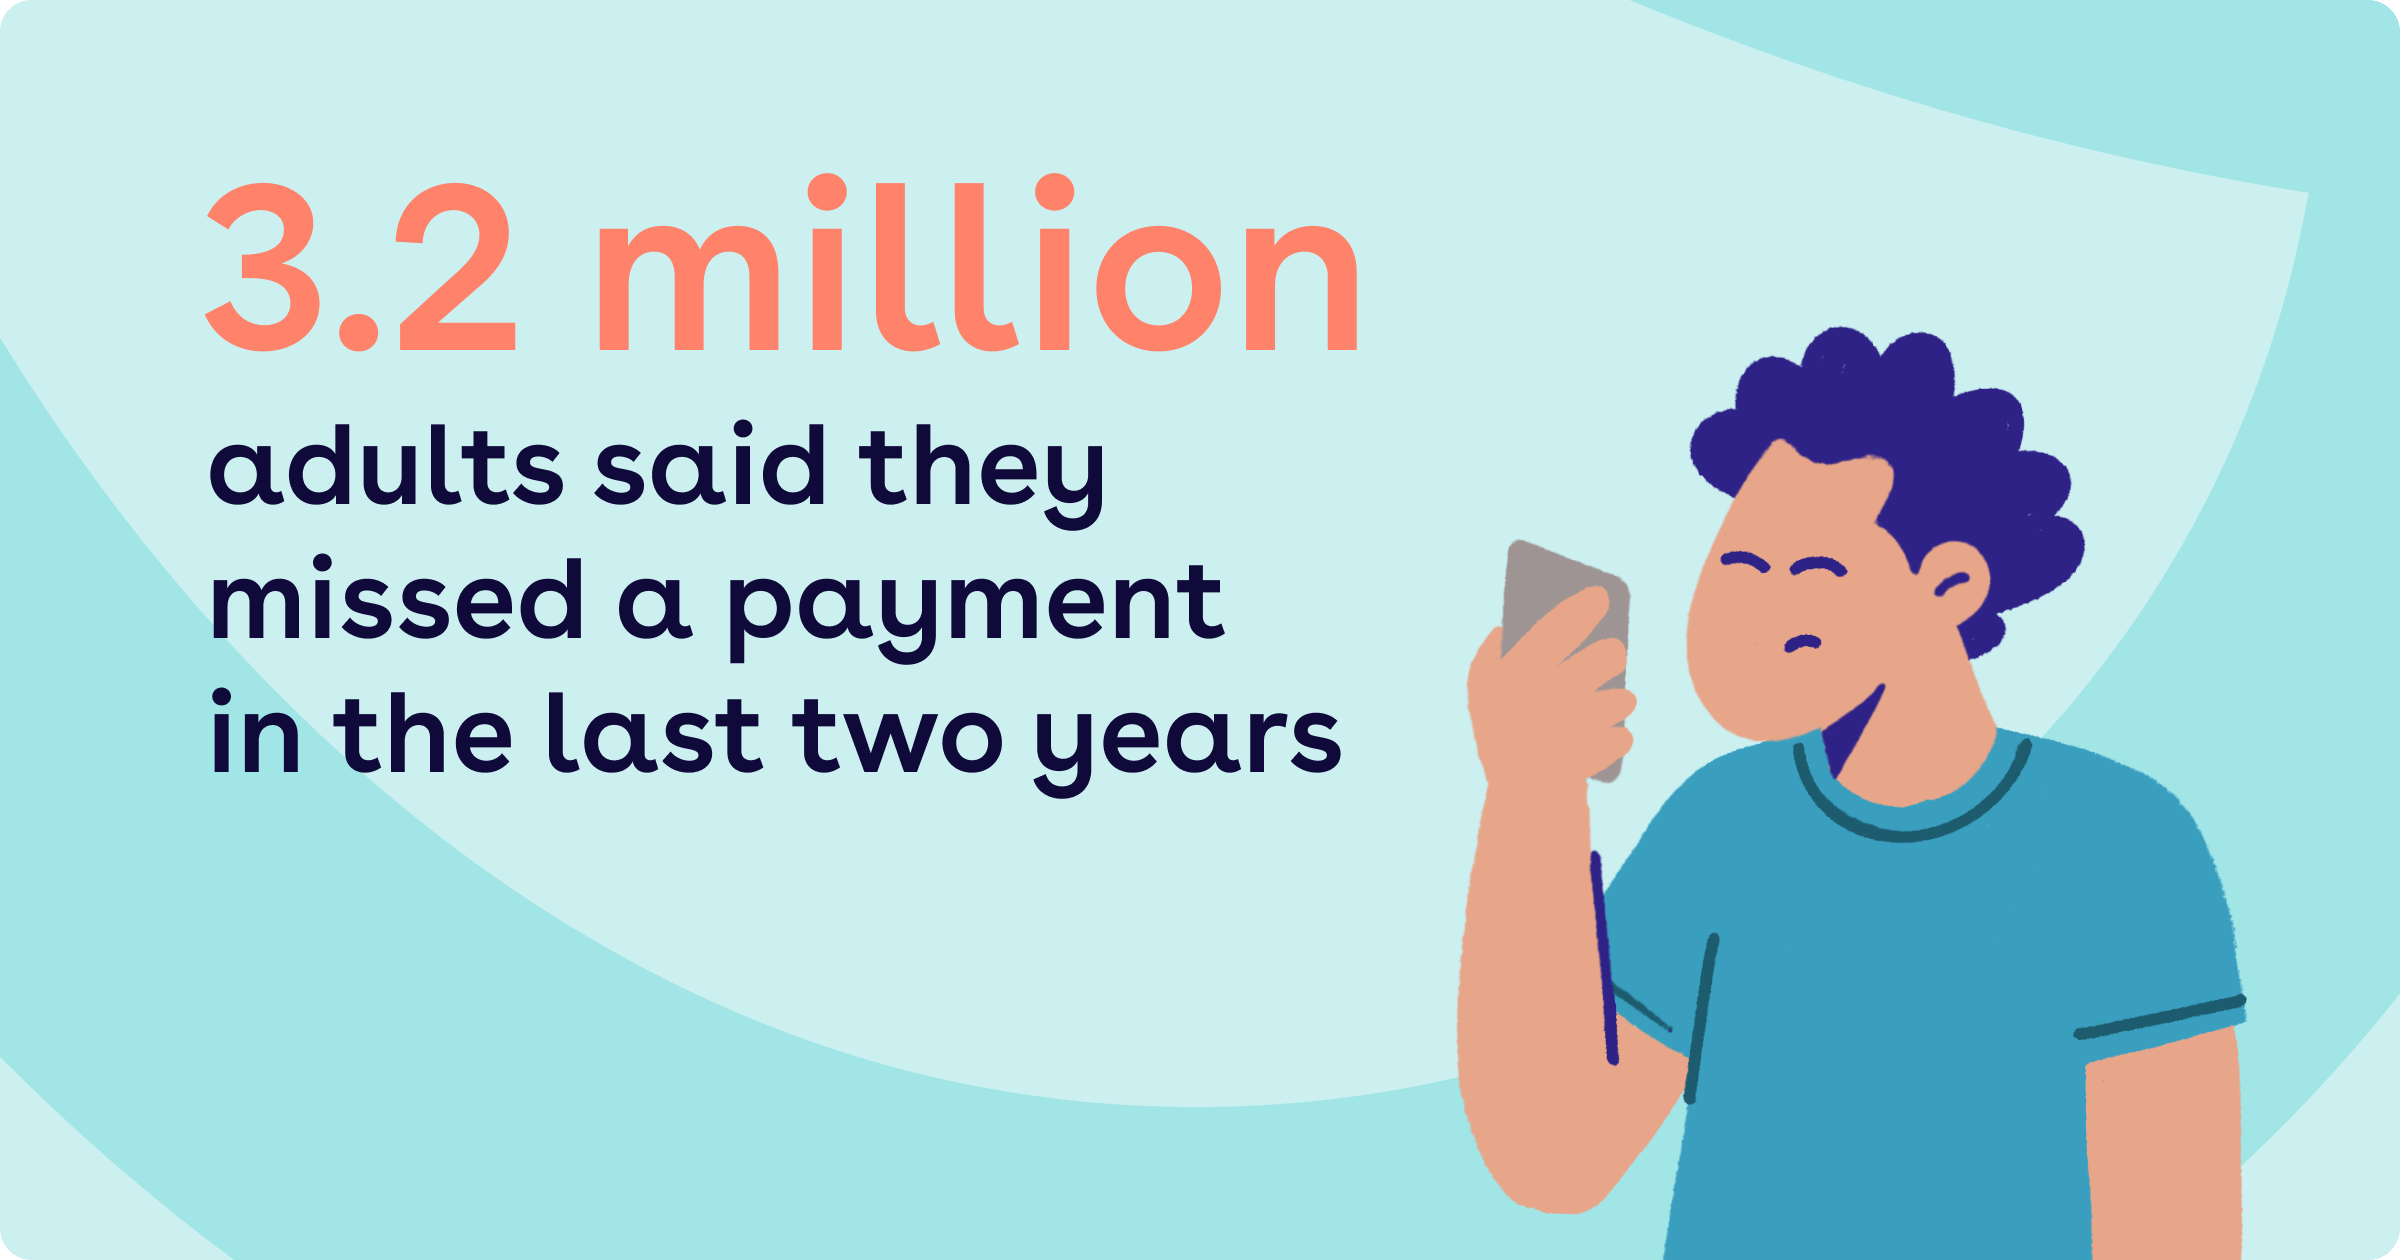 3.2 million adults said they missed a payment in the last two years